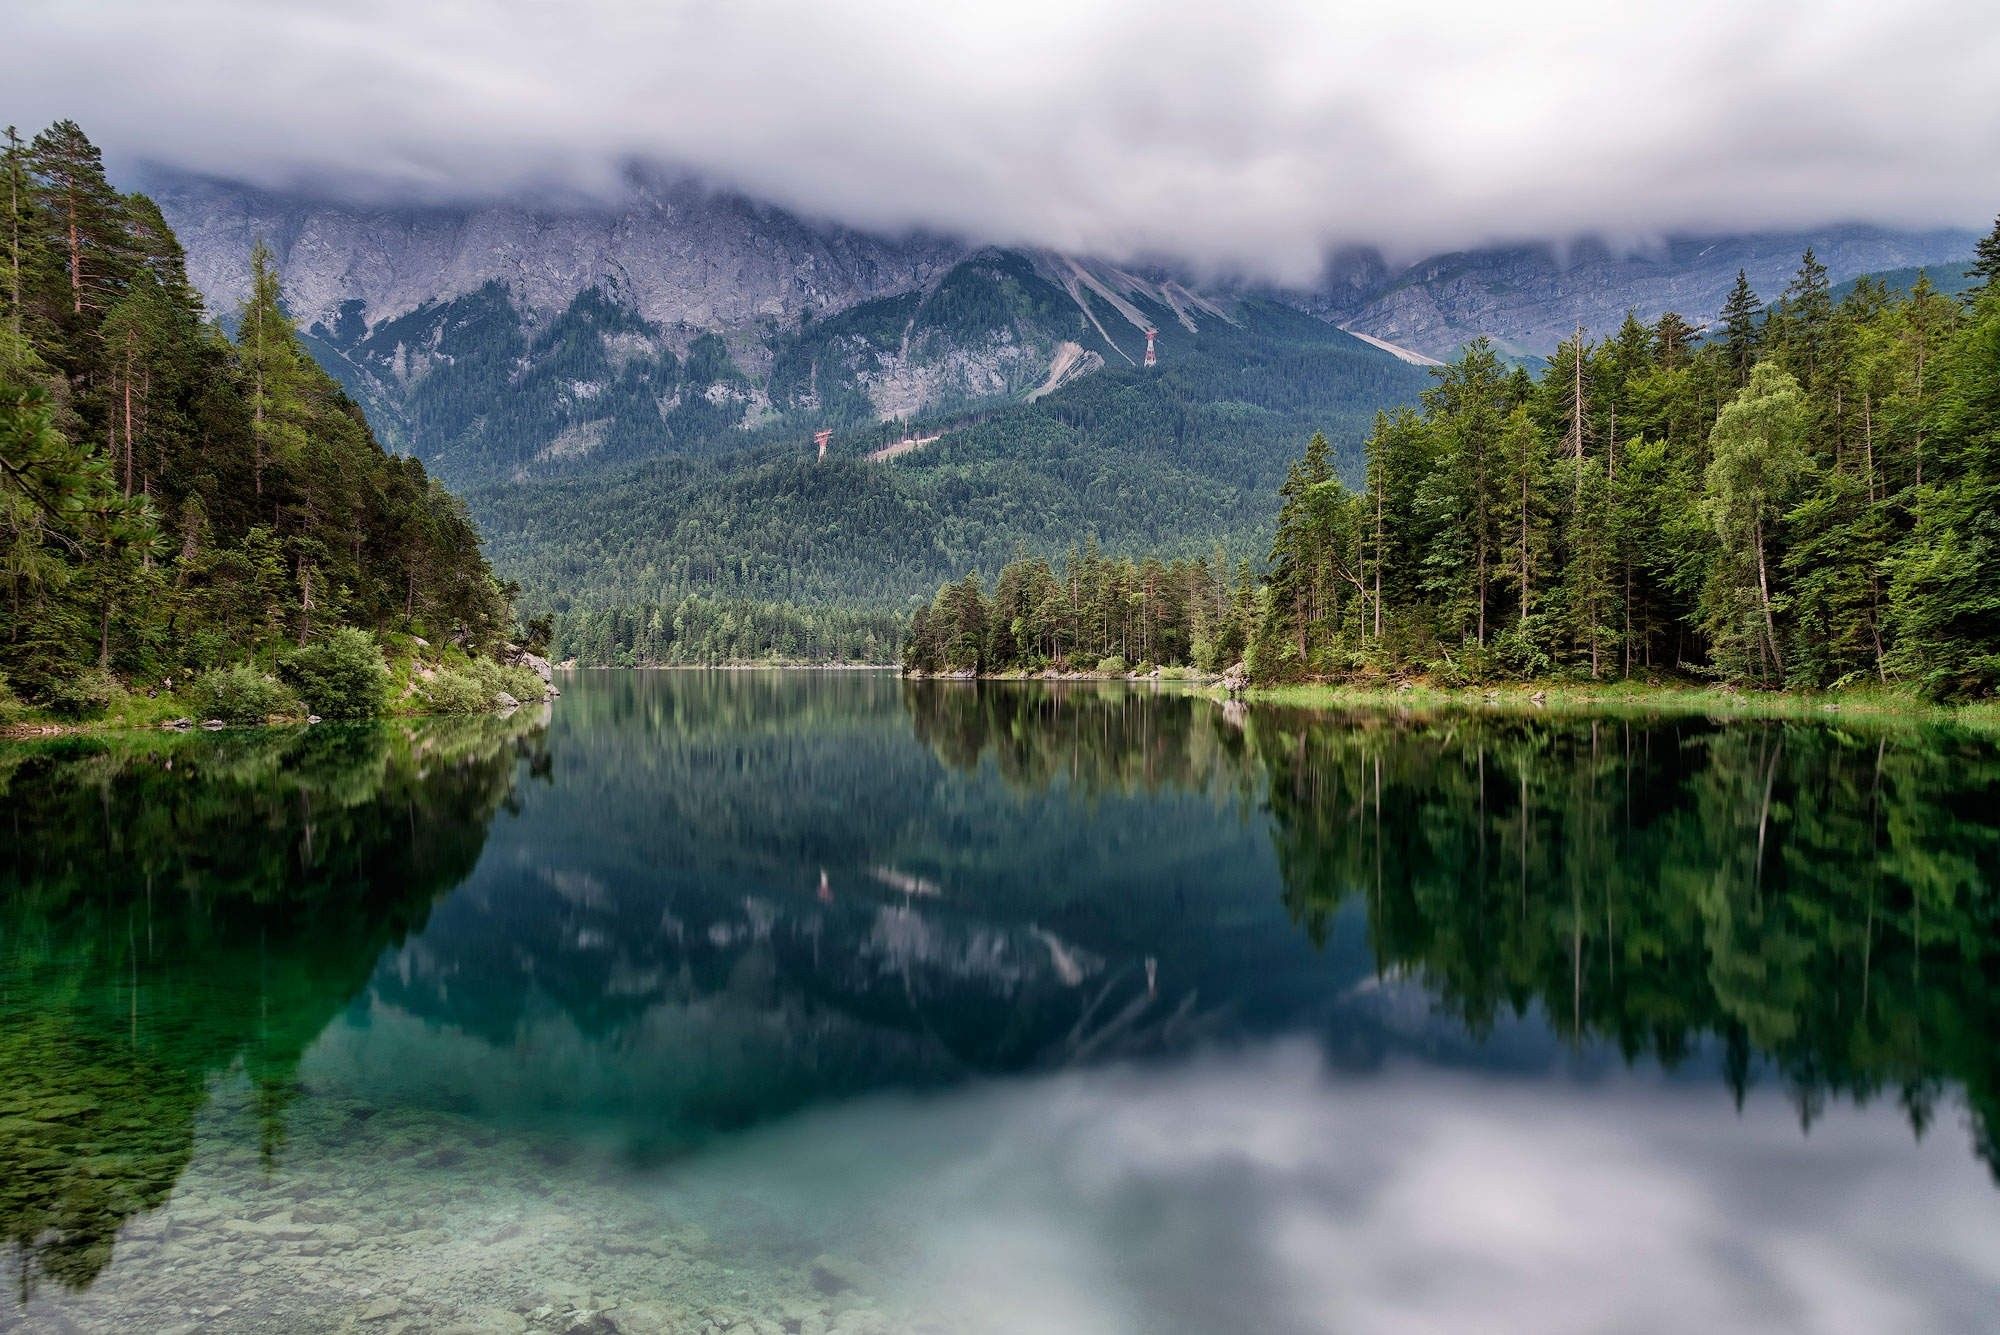 photography landscape nature overcast lake reflection forest mountains summer germany wallpaper